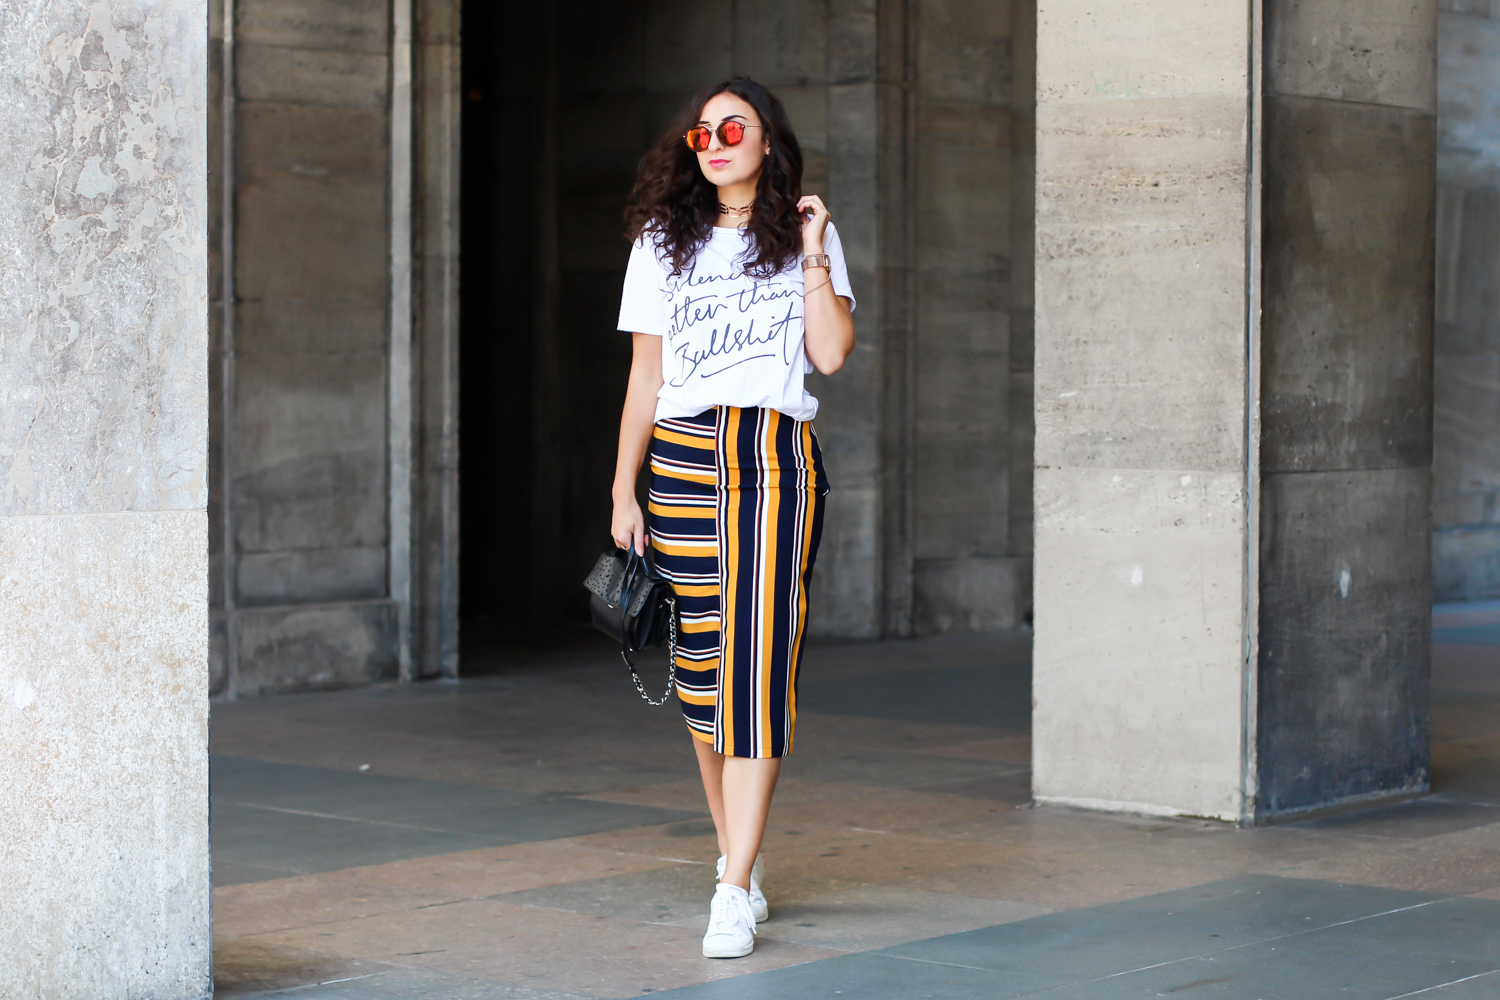 New Look striped midi skirt Rad motto shirt adidas superstars women outfit casual sporty summer look berlinstyle fashion blogger germany berlin samieze